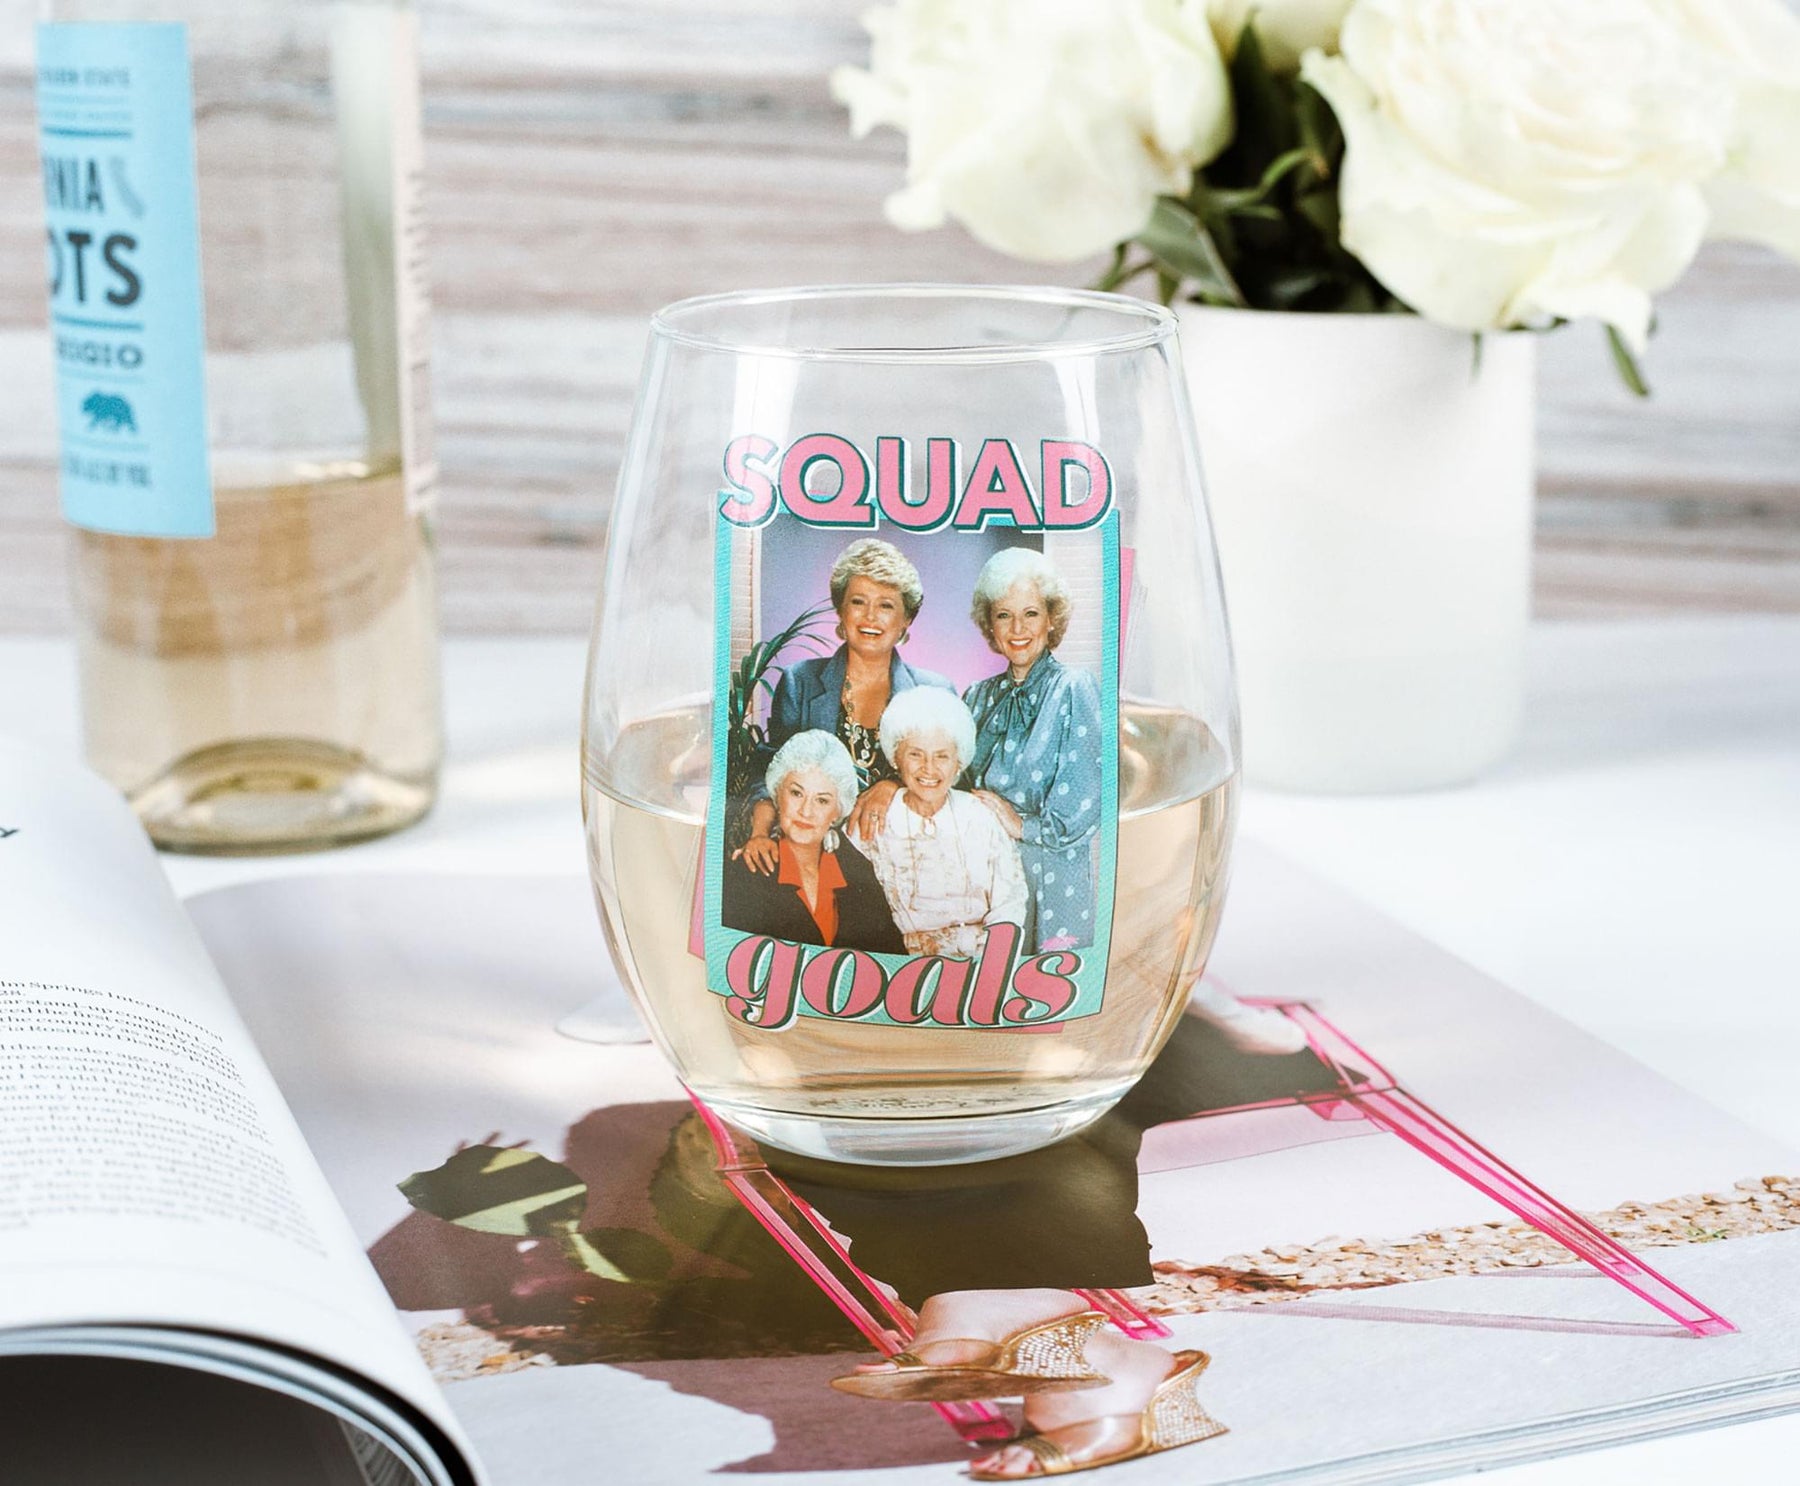 The Golden Girls "Squad Goals" Stemless Glass | Holds 20 Ounces